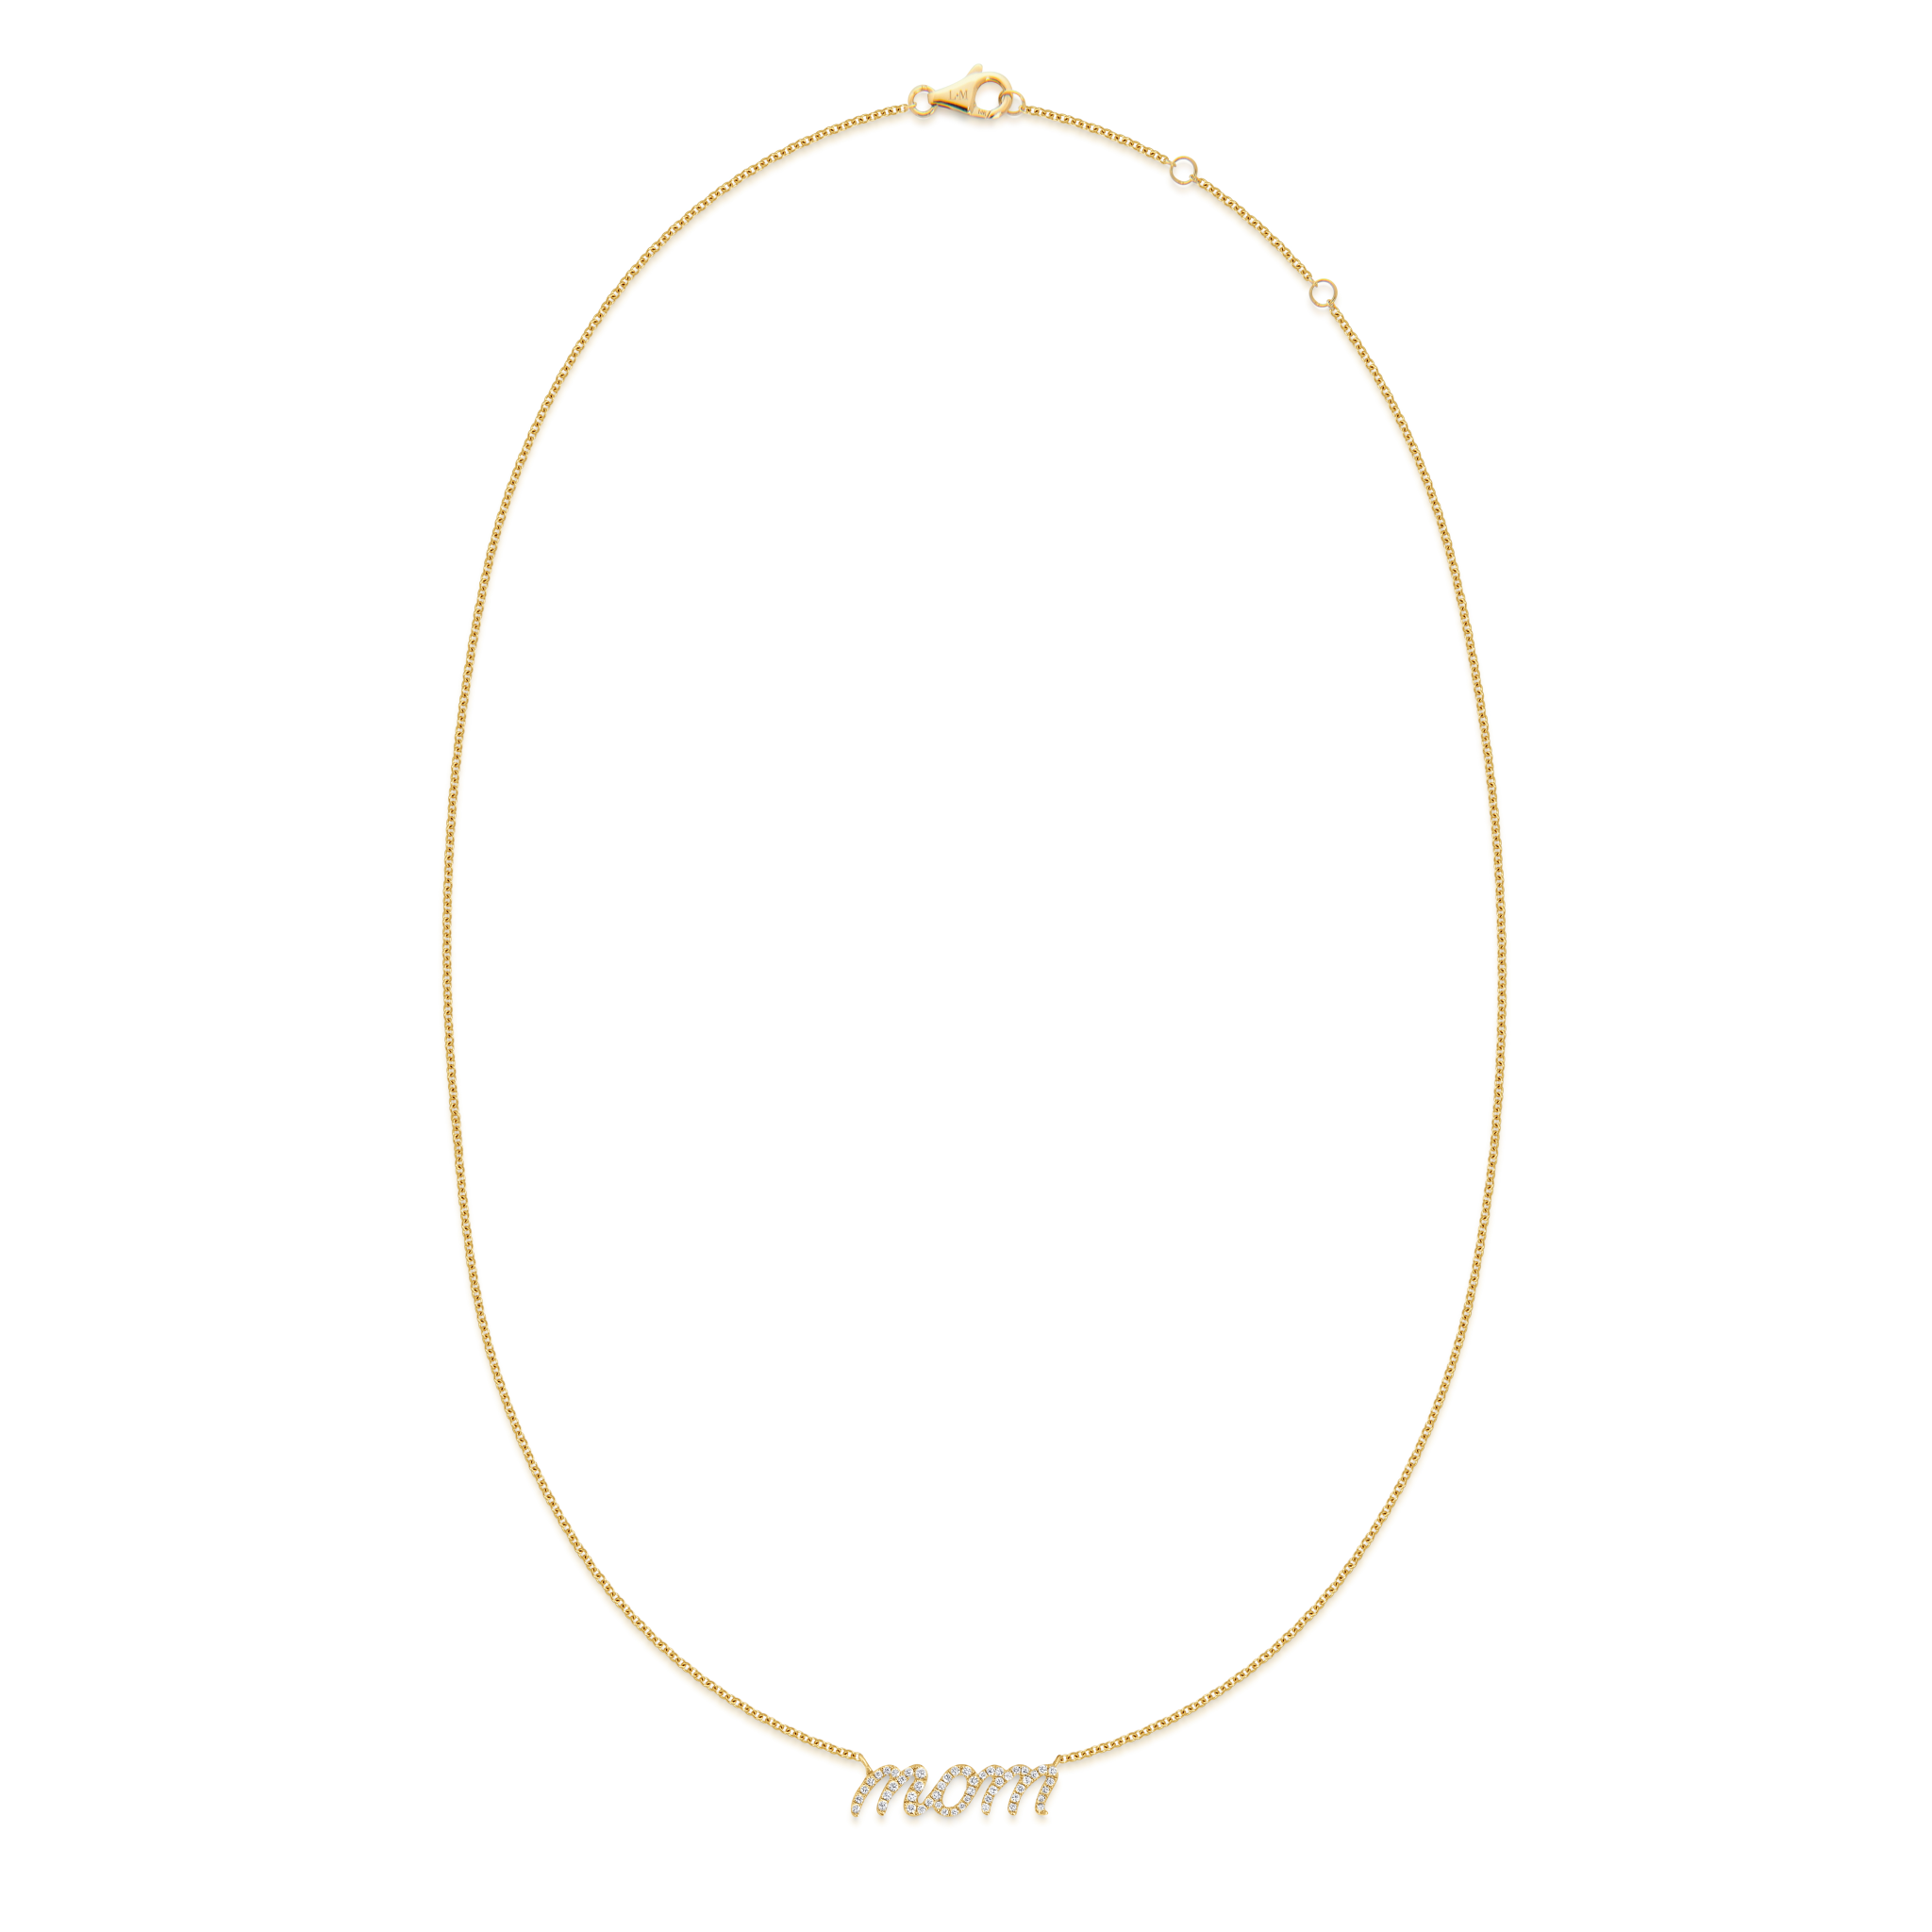 Mom necklace